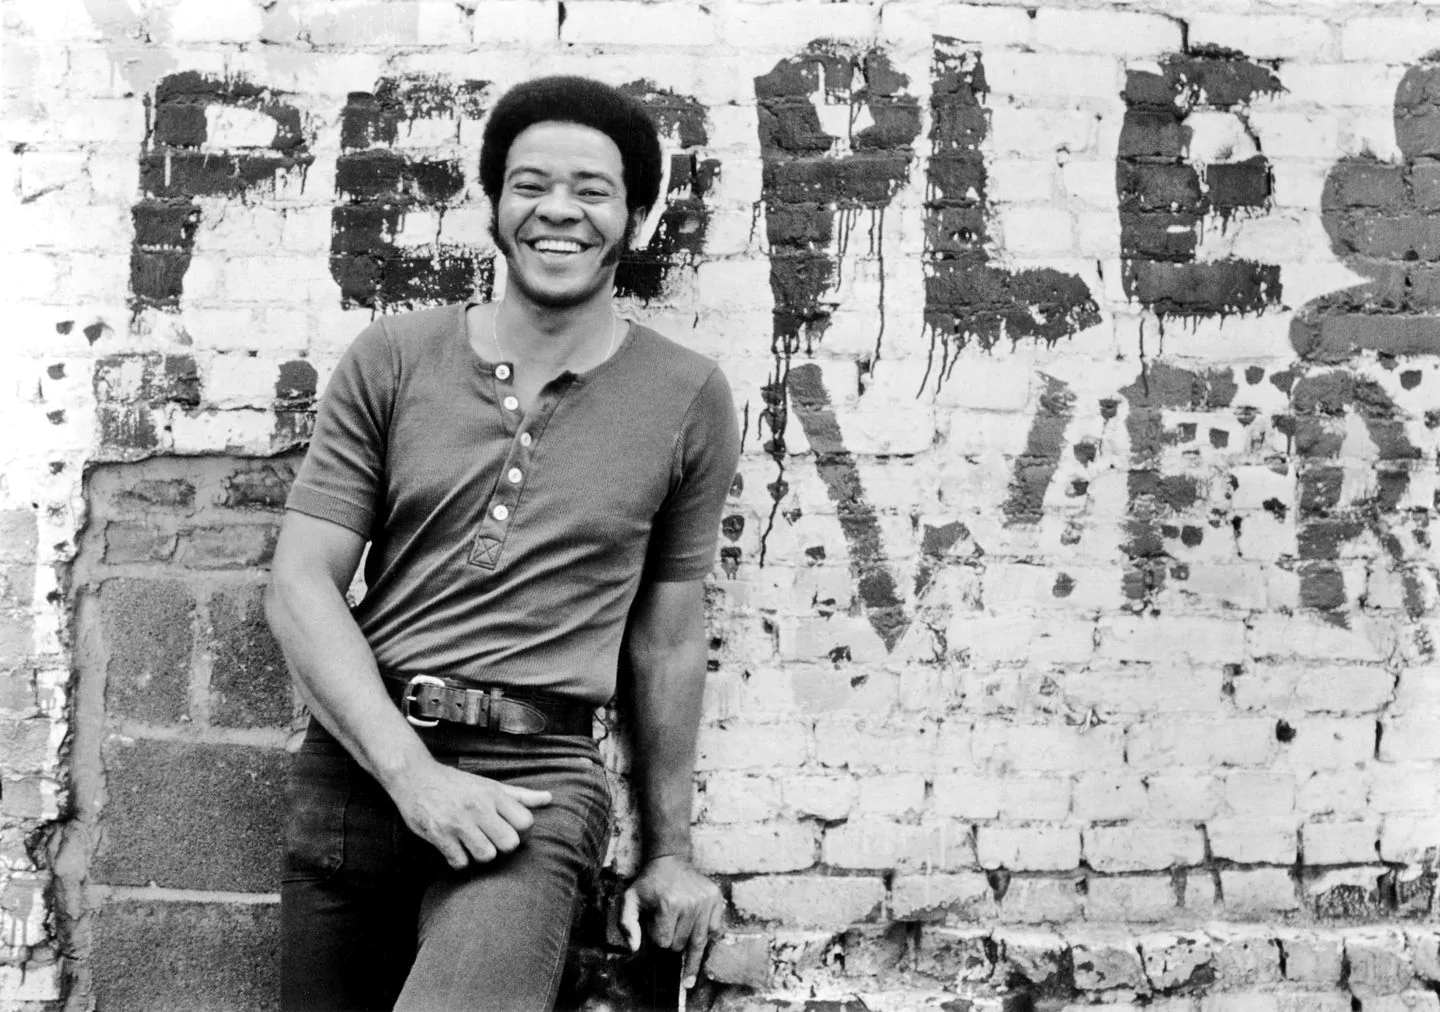 Bill Withers was in his 30s with a job making toilets. Then ‘Ain’t No Sunshine’ changed his life.